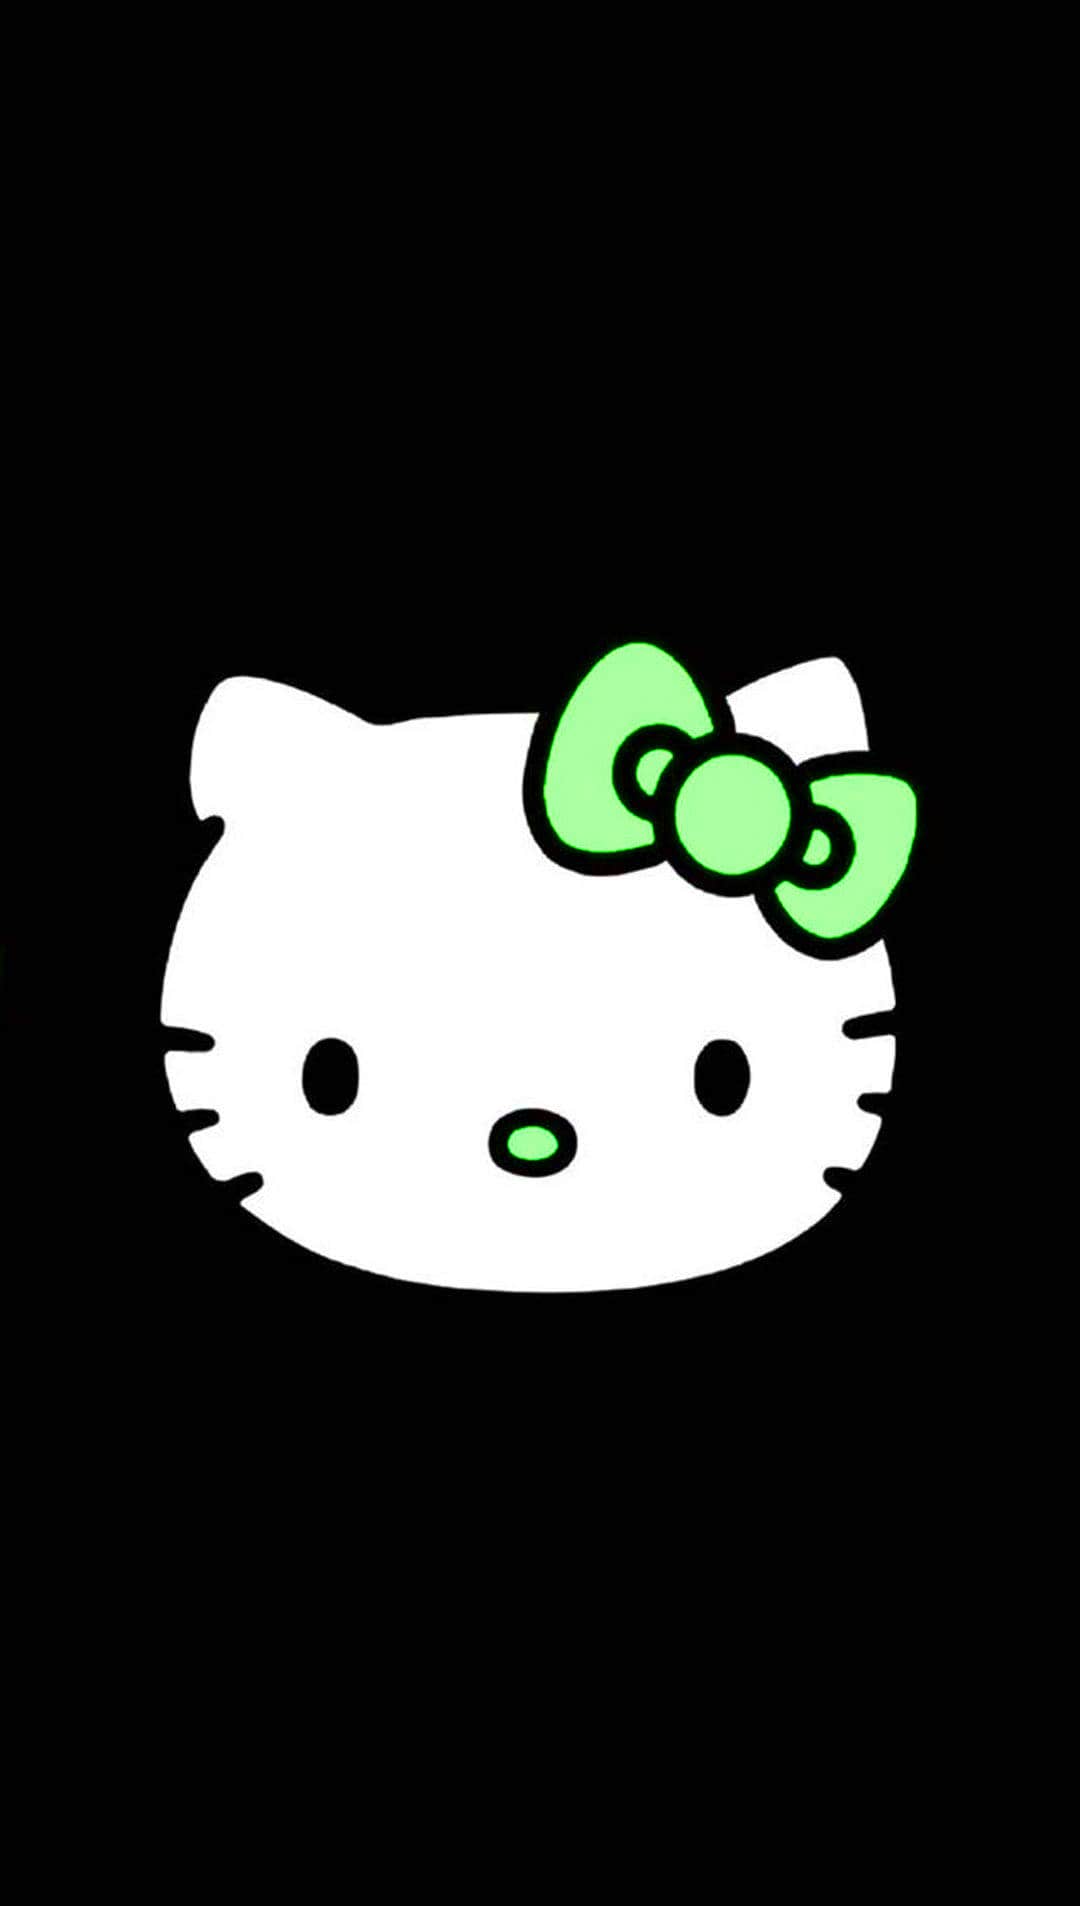 IPhone wallpaper of Hello Kitty with a green bow on a black background - Hello Kitty